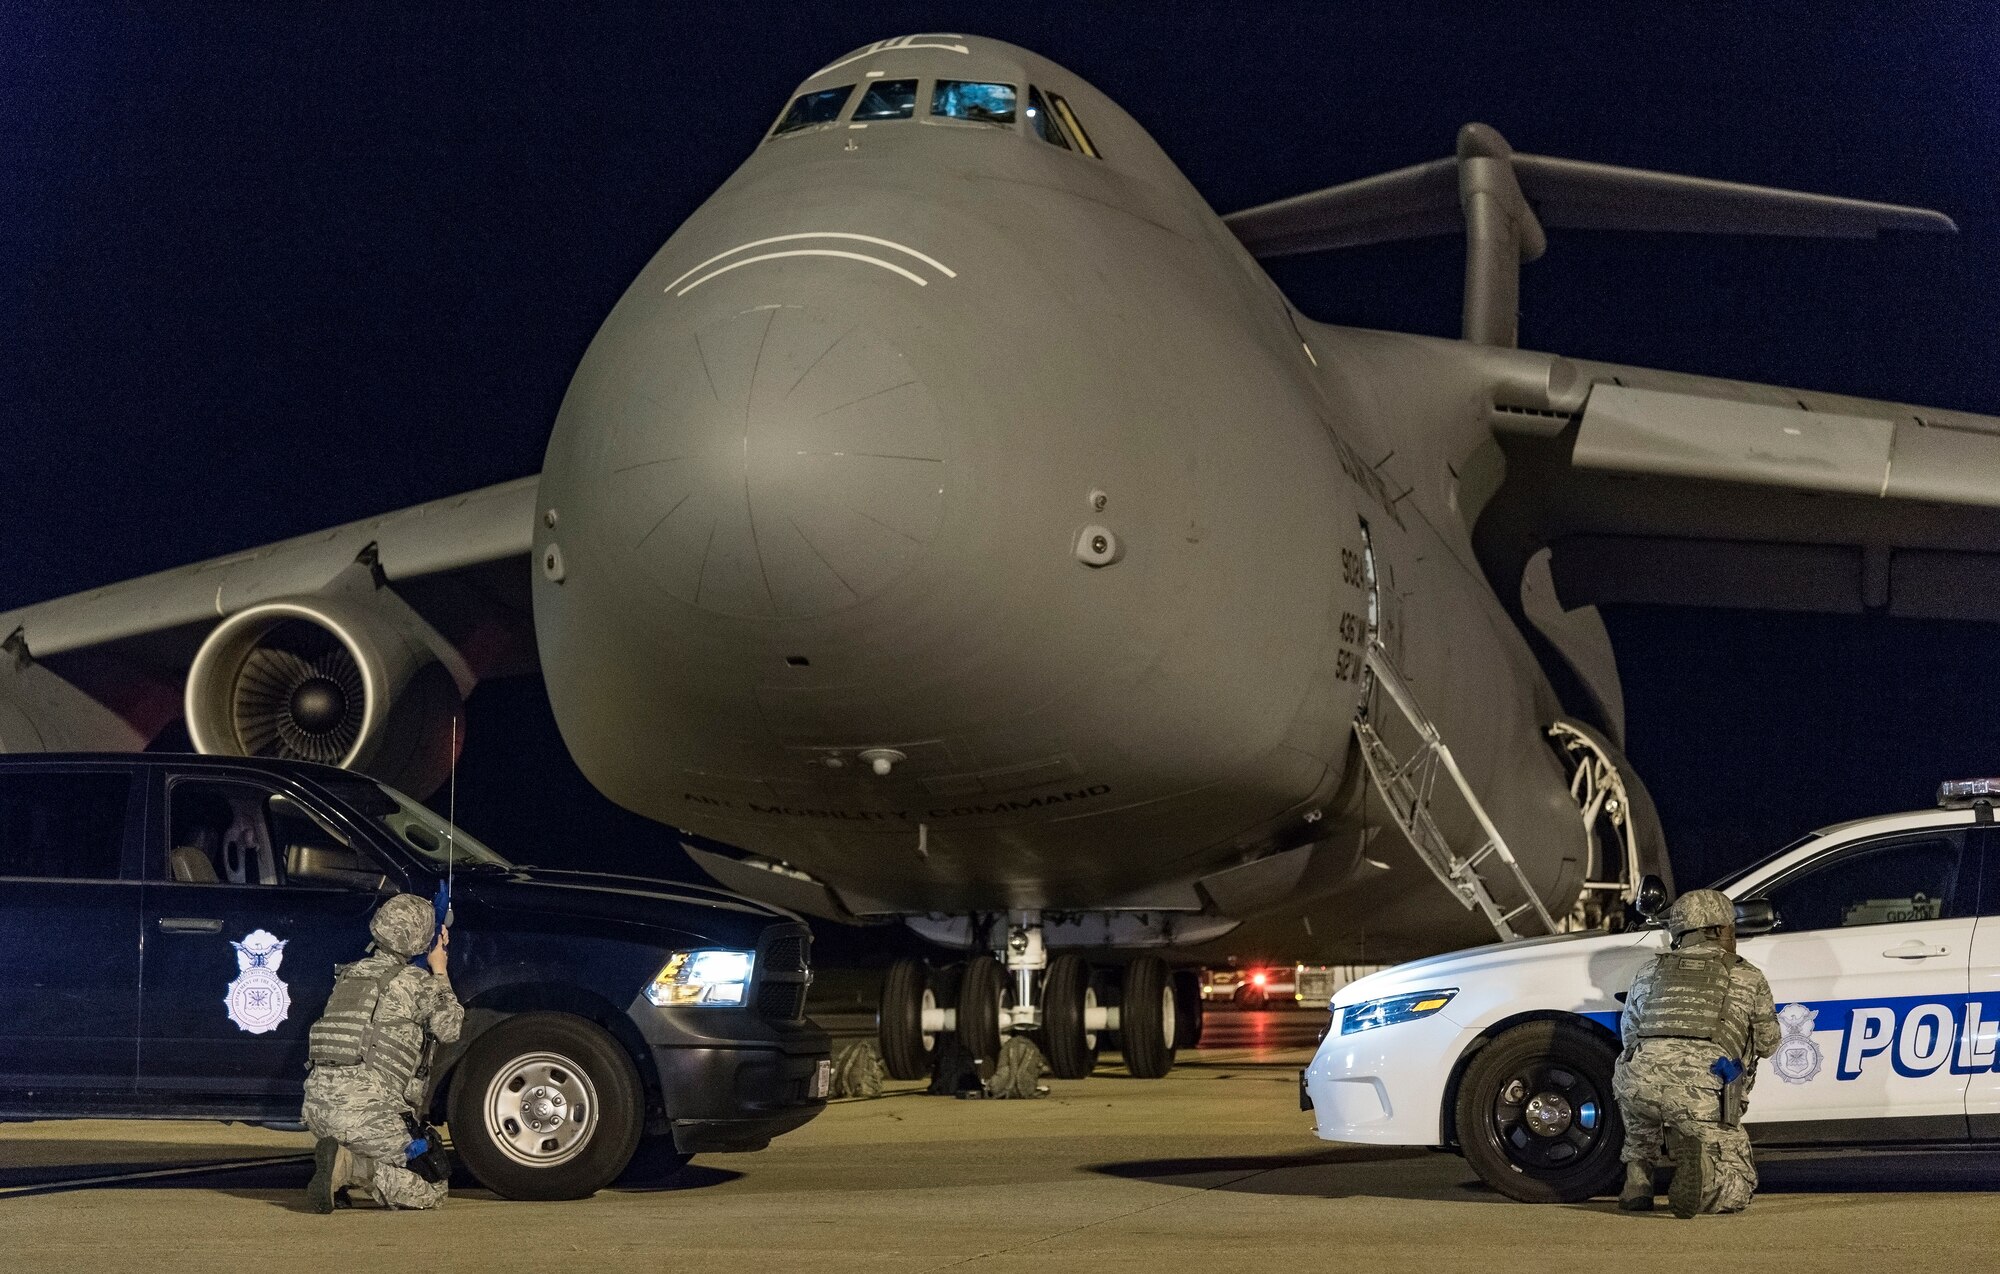 Two 436th Security Forces Squadron response force members take cover behind their vehicles positioned in front of a C-5M Super Galaxy as part of anti-hijacking measures Sept. 17, 2018, on Dover Air Force Base, Del. More than 20 response force members and other first responders positioned themselves and vehicles around the C-5M in response to a simulated attempted hijacking and hostage scenario. (U.S. Air Force photo by Roland Balik)